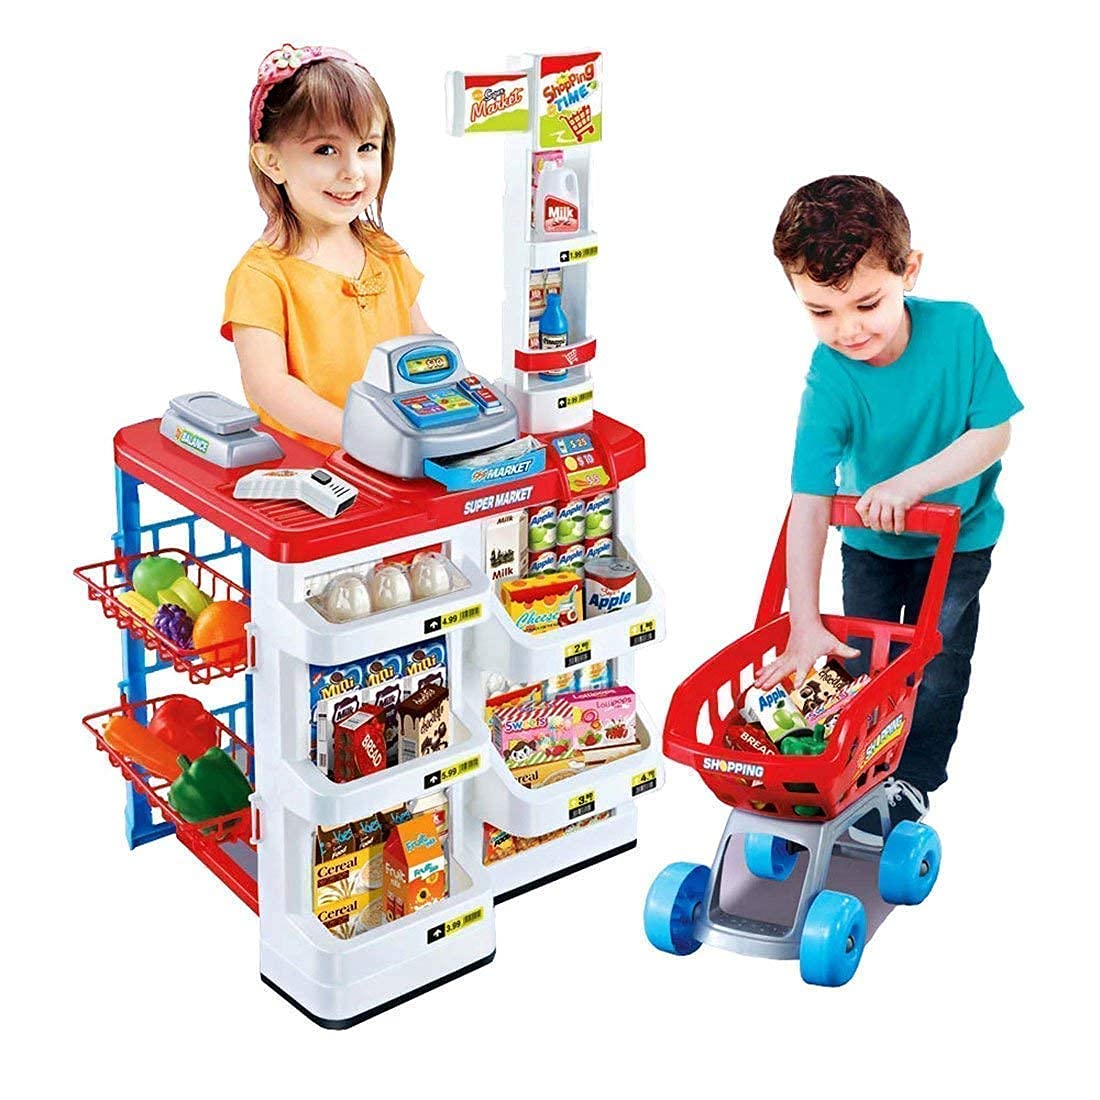 mke Mini Supermarket Toy Set for Kids/Ice Cream Shop/Pretend Play Kitchen Set for Girls and Boys (37 Pieces)